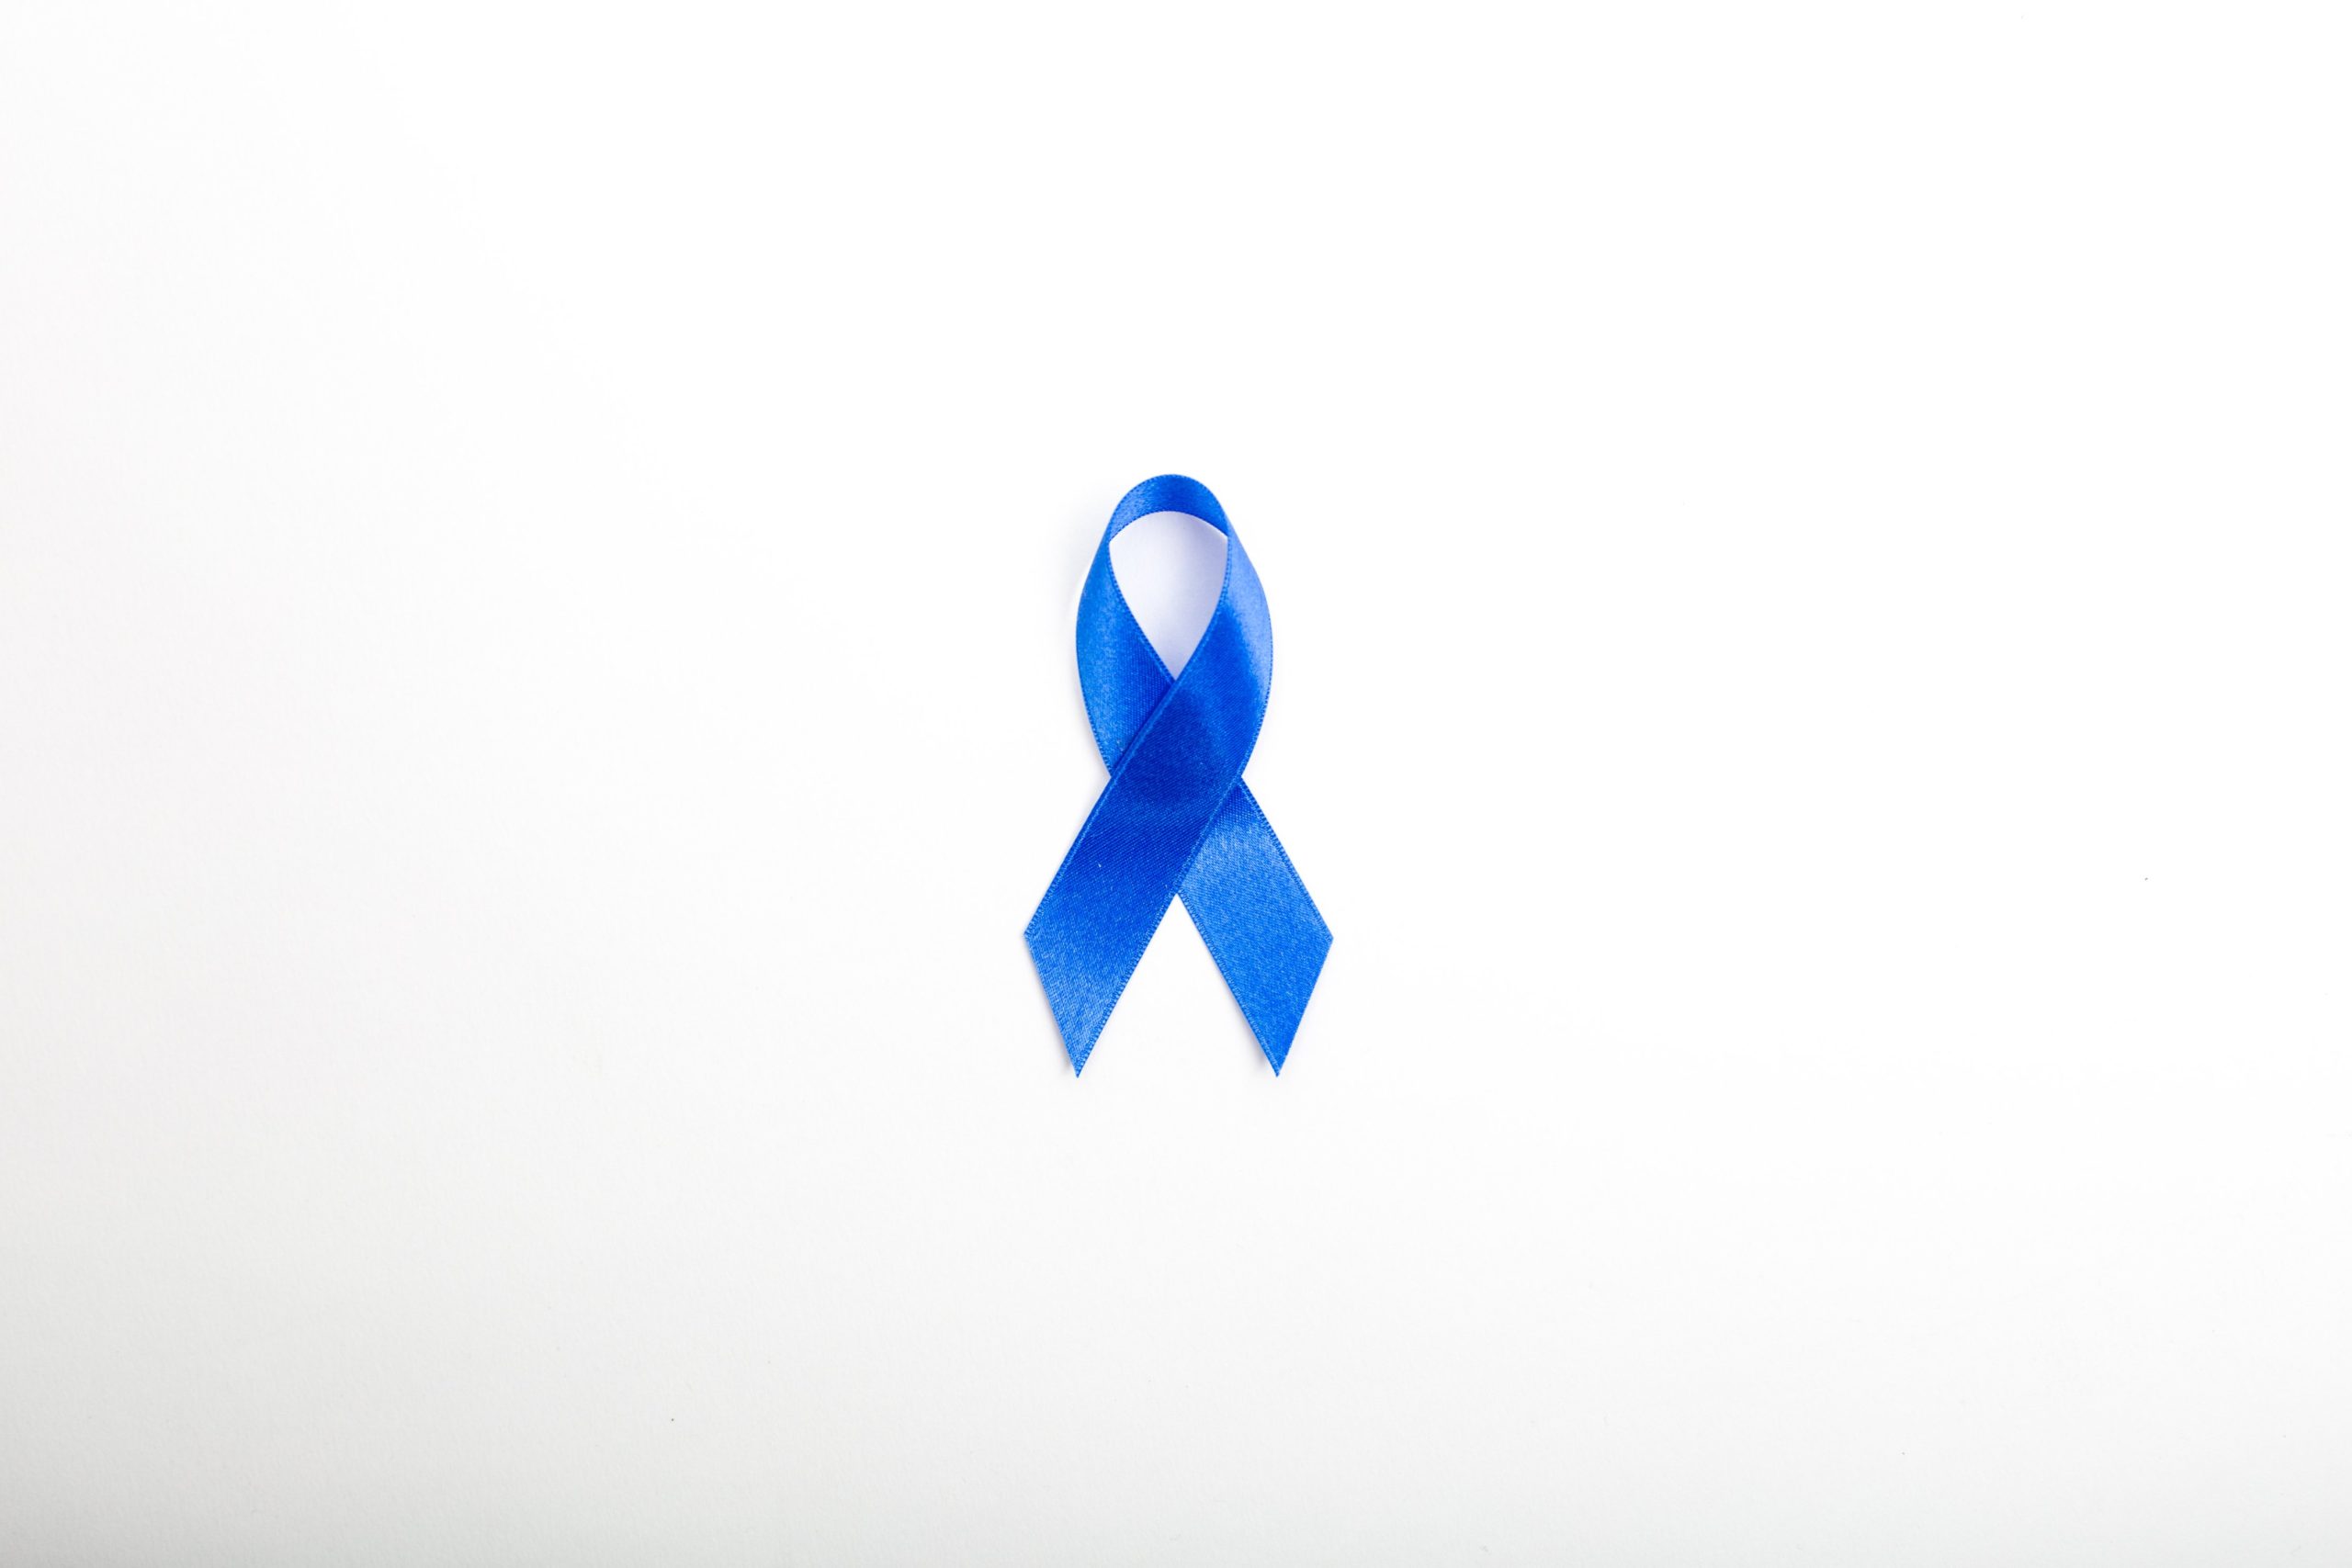 Colorectal cancer awareness month